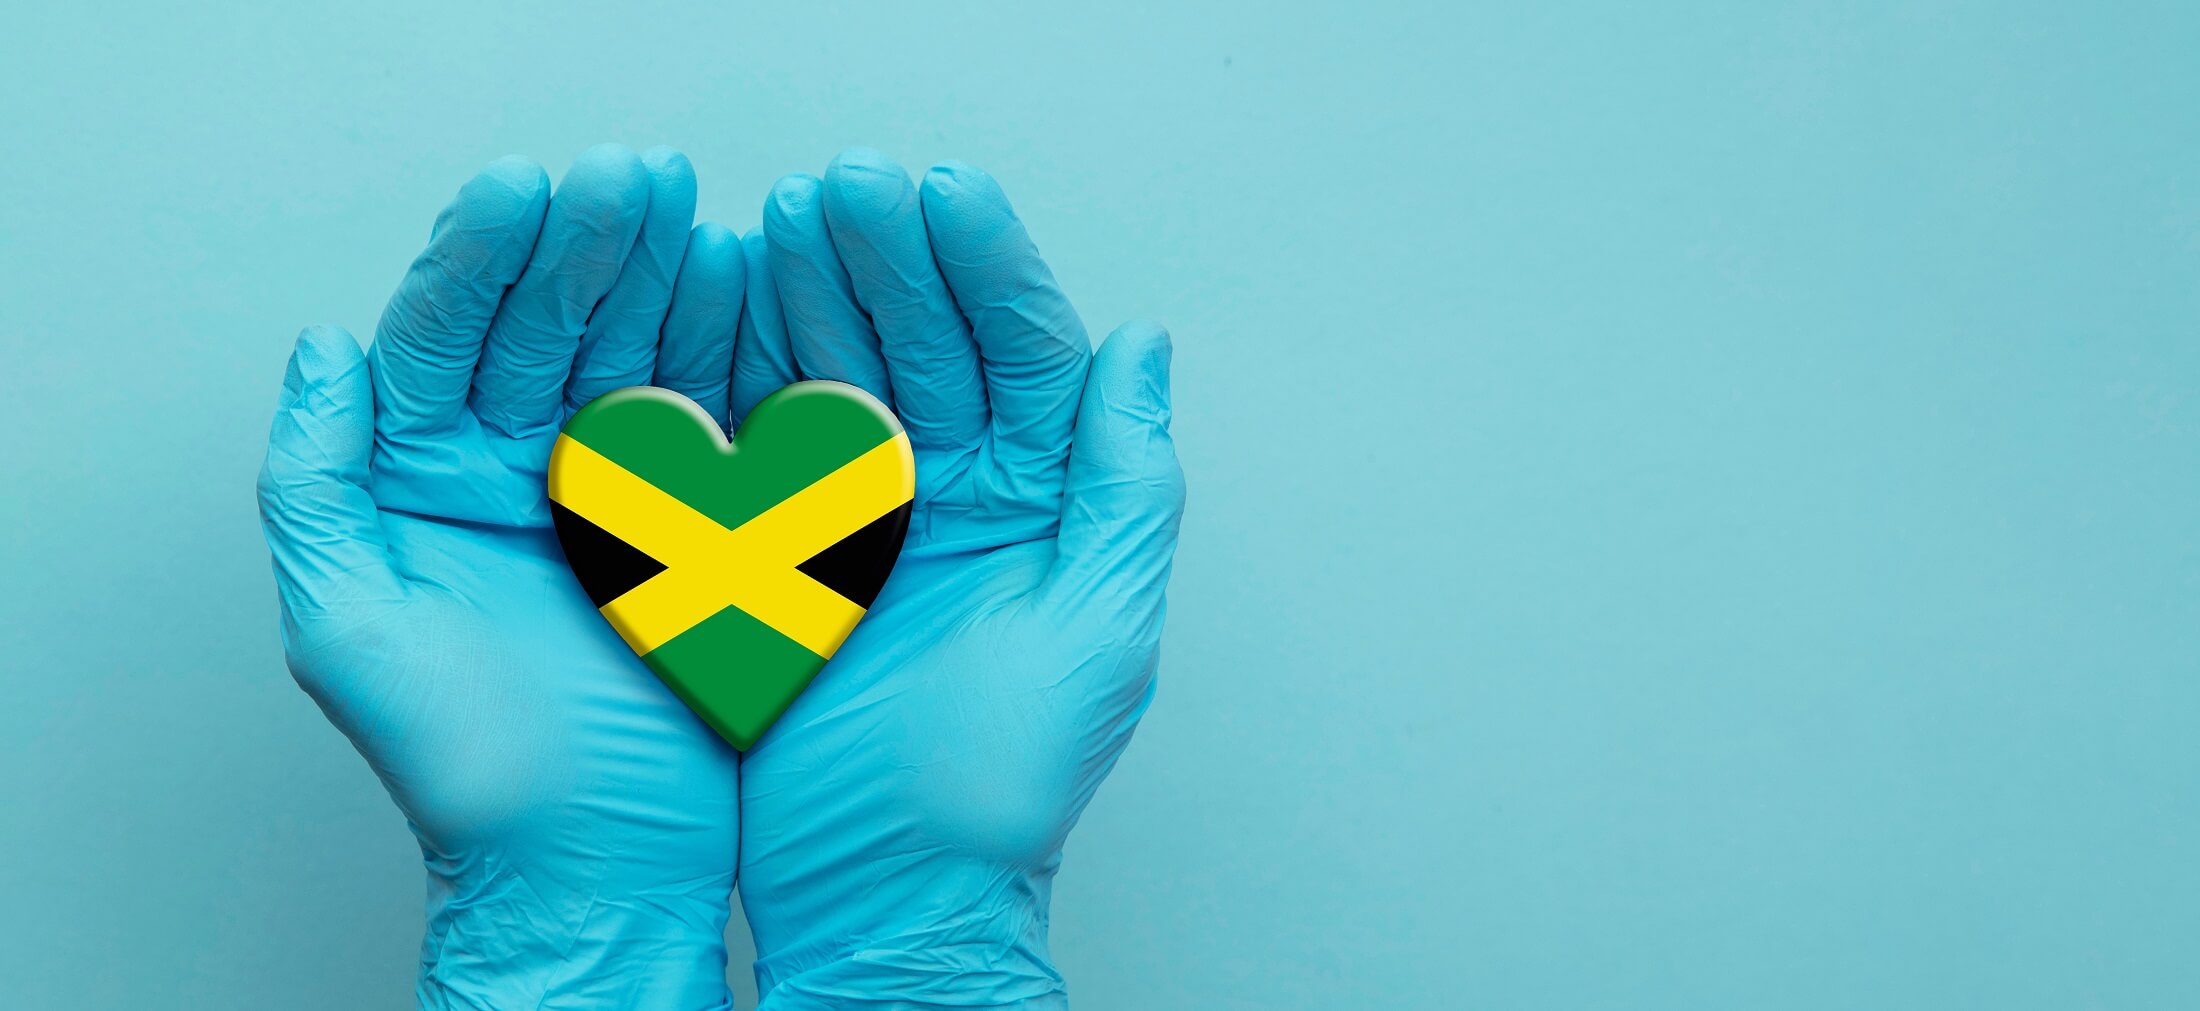 Doctors hands wearing surgical gloves holding Jamaica flag heart